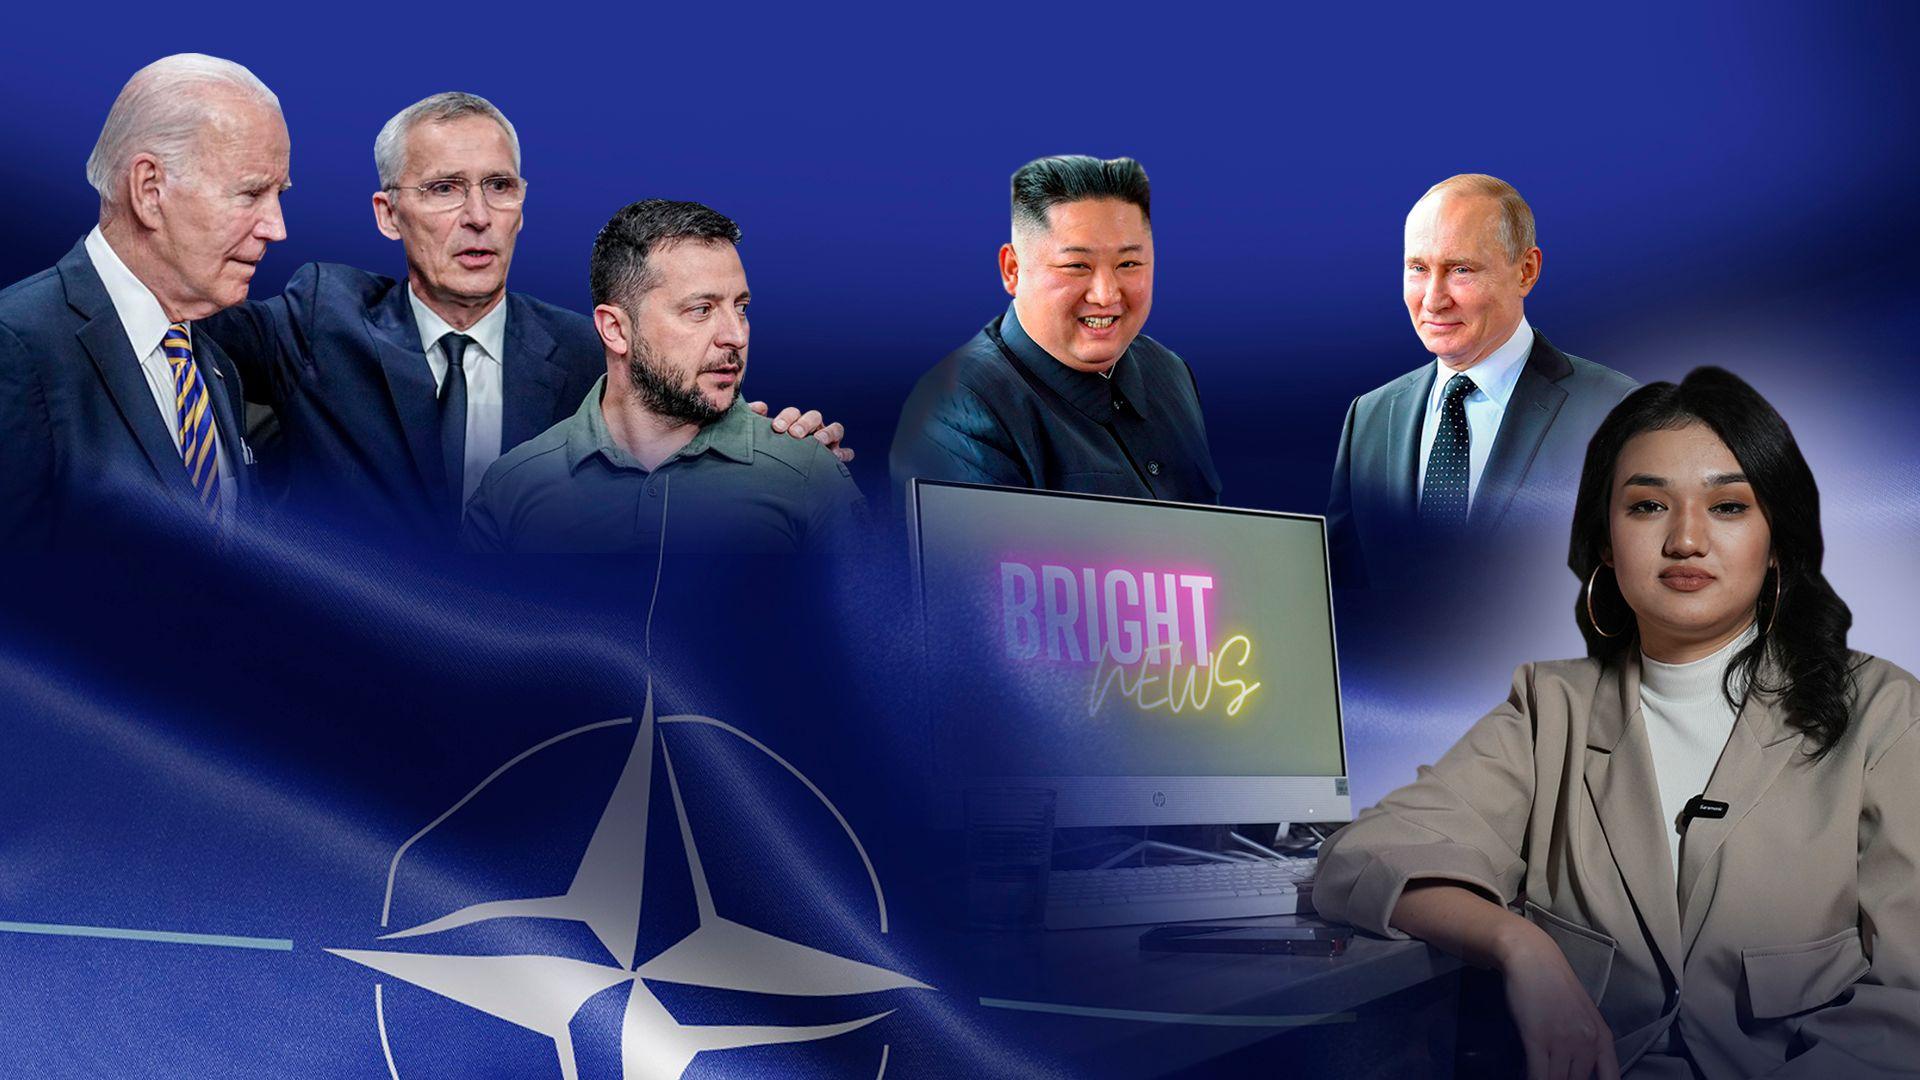 What signal is NATO giving to Russia and why is Kim Jong-un meeting with Putin?